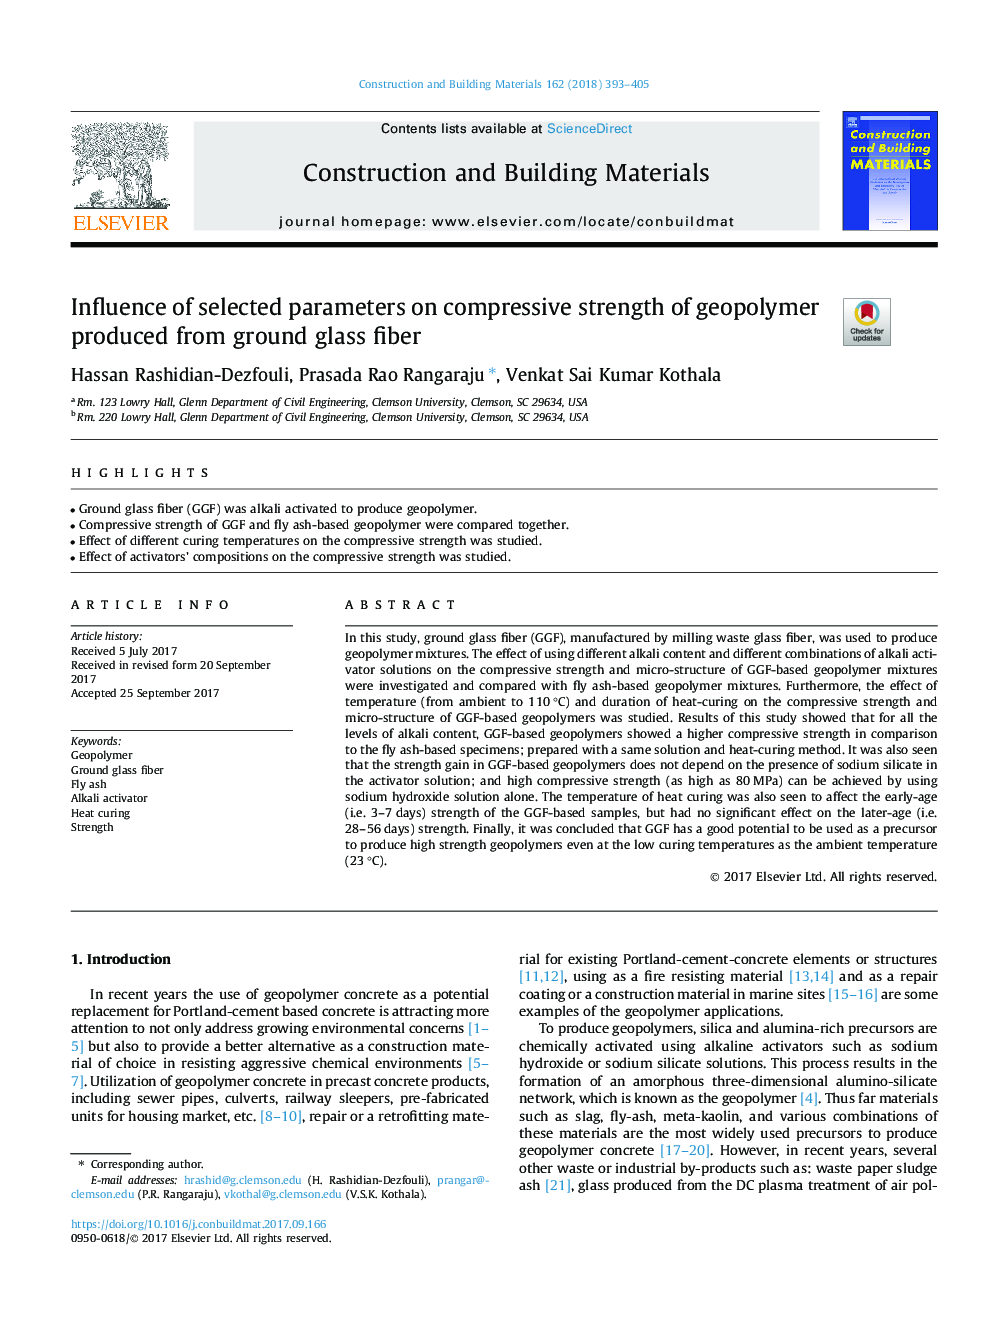 Influence of selected parameters on compressive strength of geopolymer produced from ground glass fiber